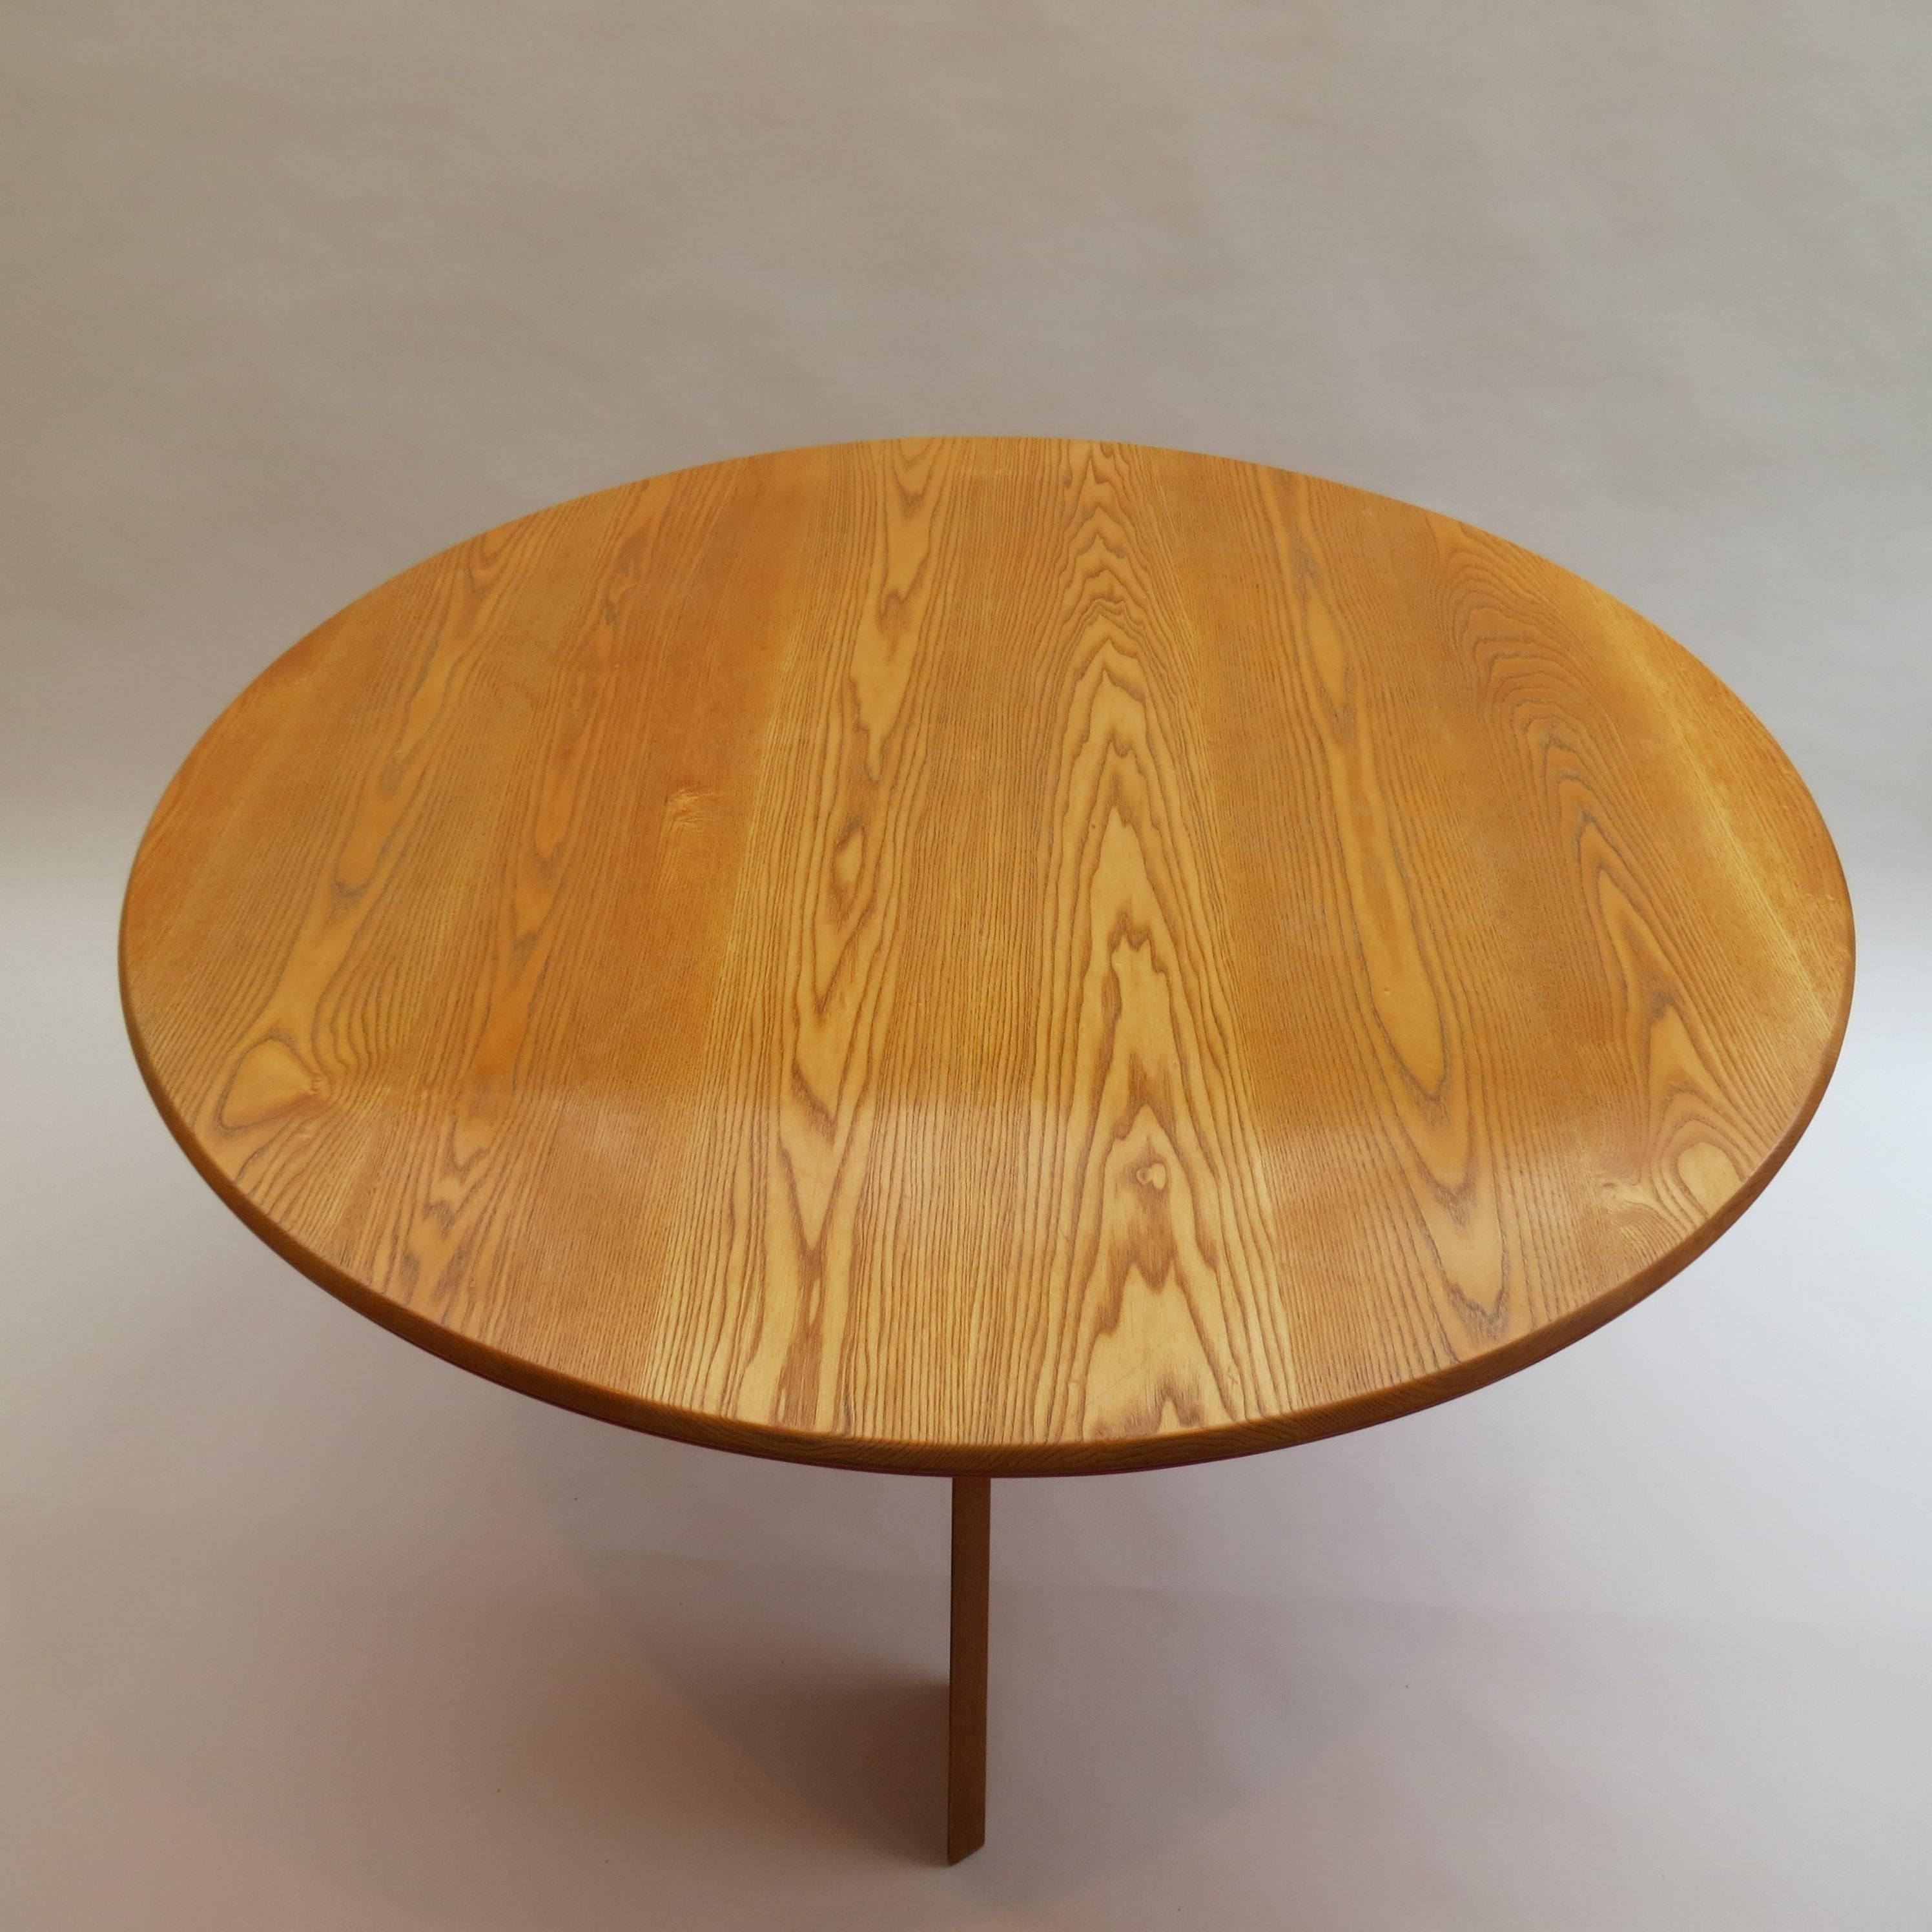 20th Century Midcentury Bespoke Circular Ash Dining Table by David Field 1980s with Red Blue